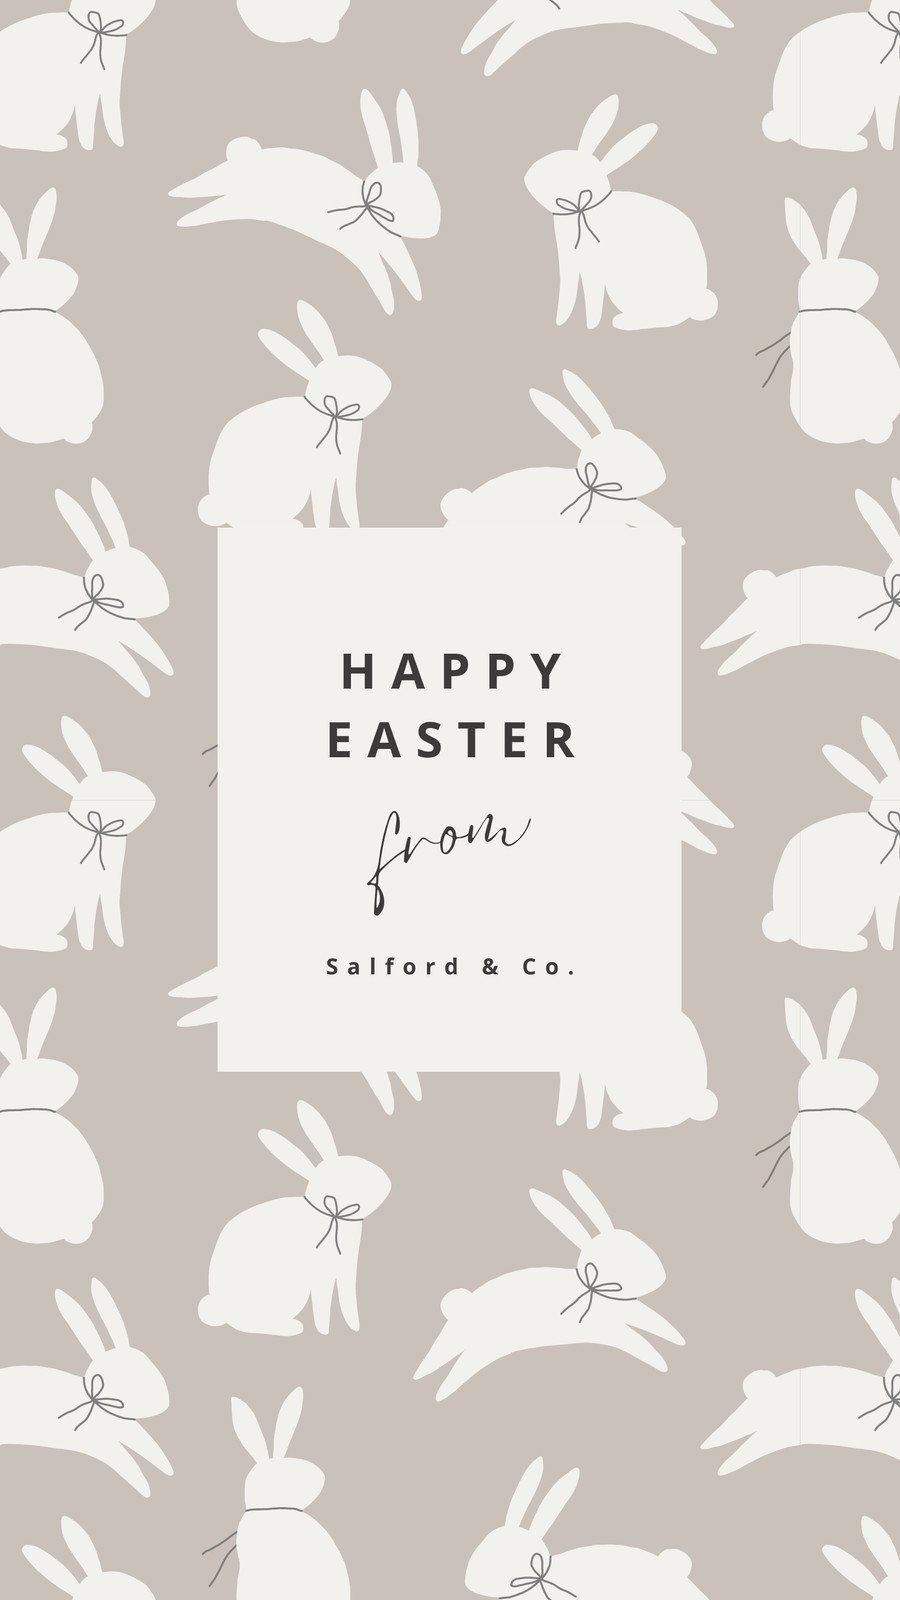 Happy easter from bethford & co - Easter